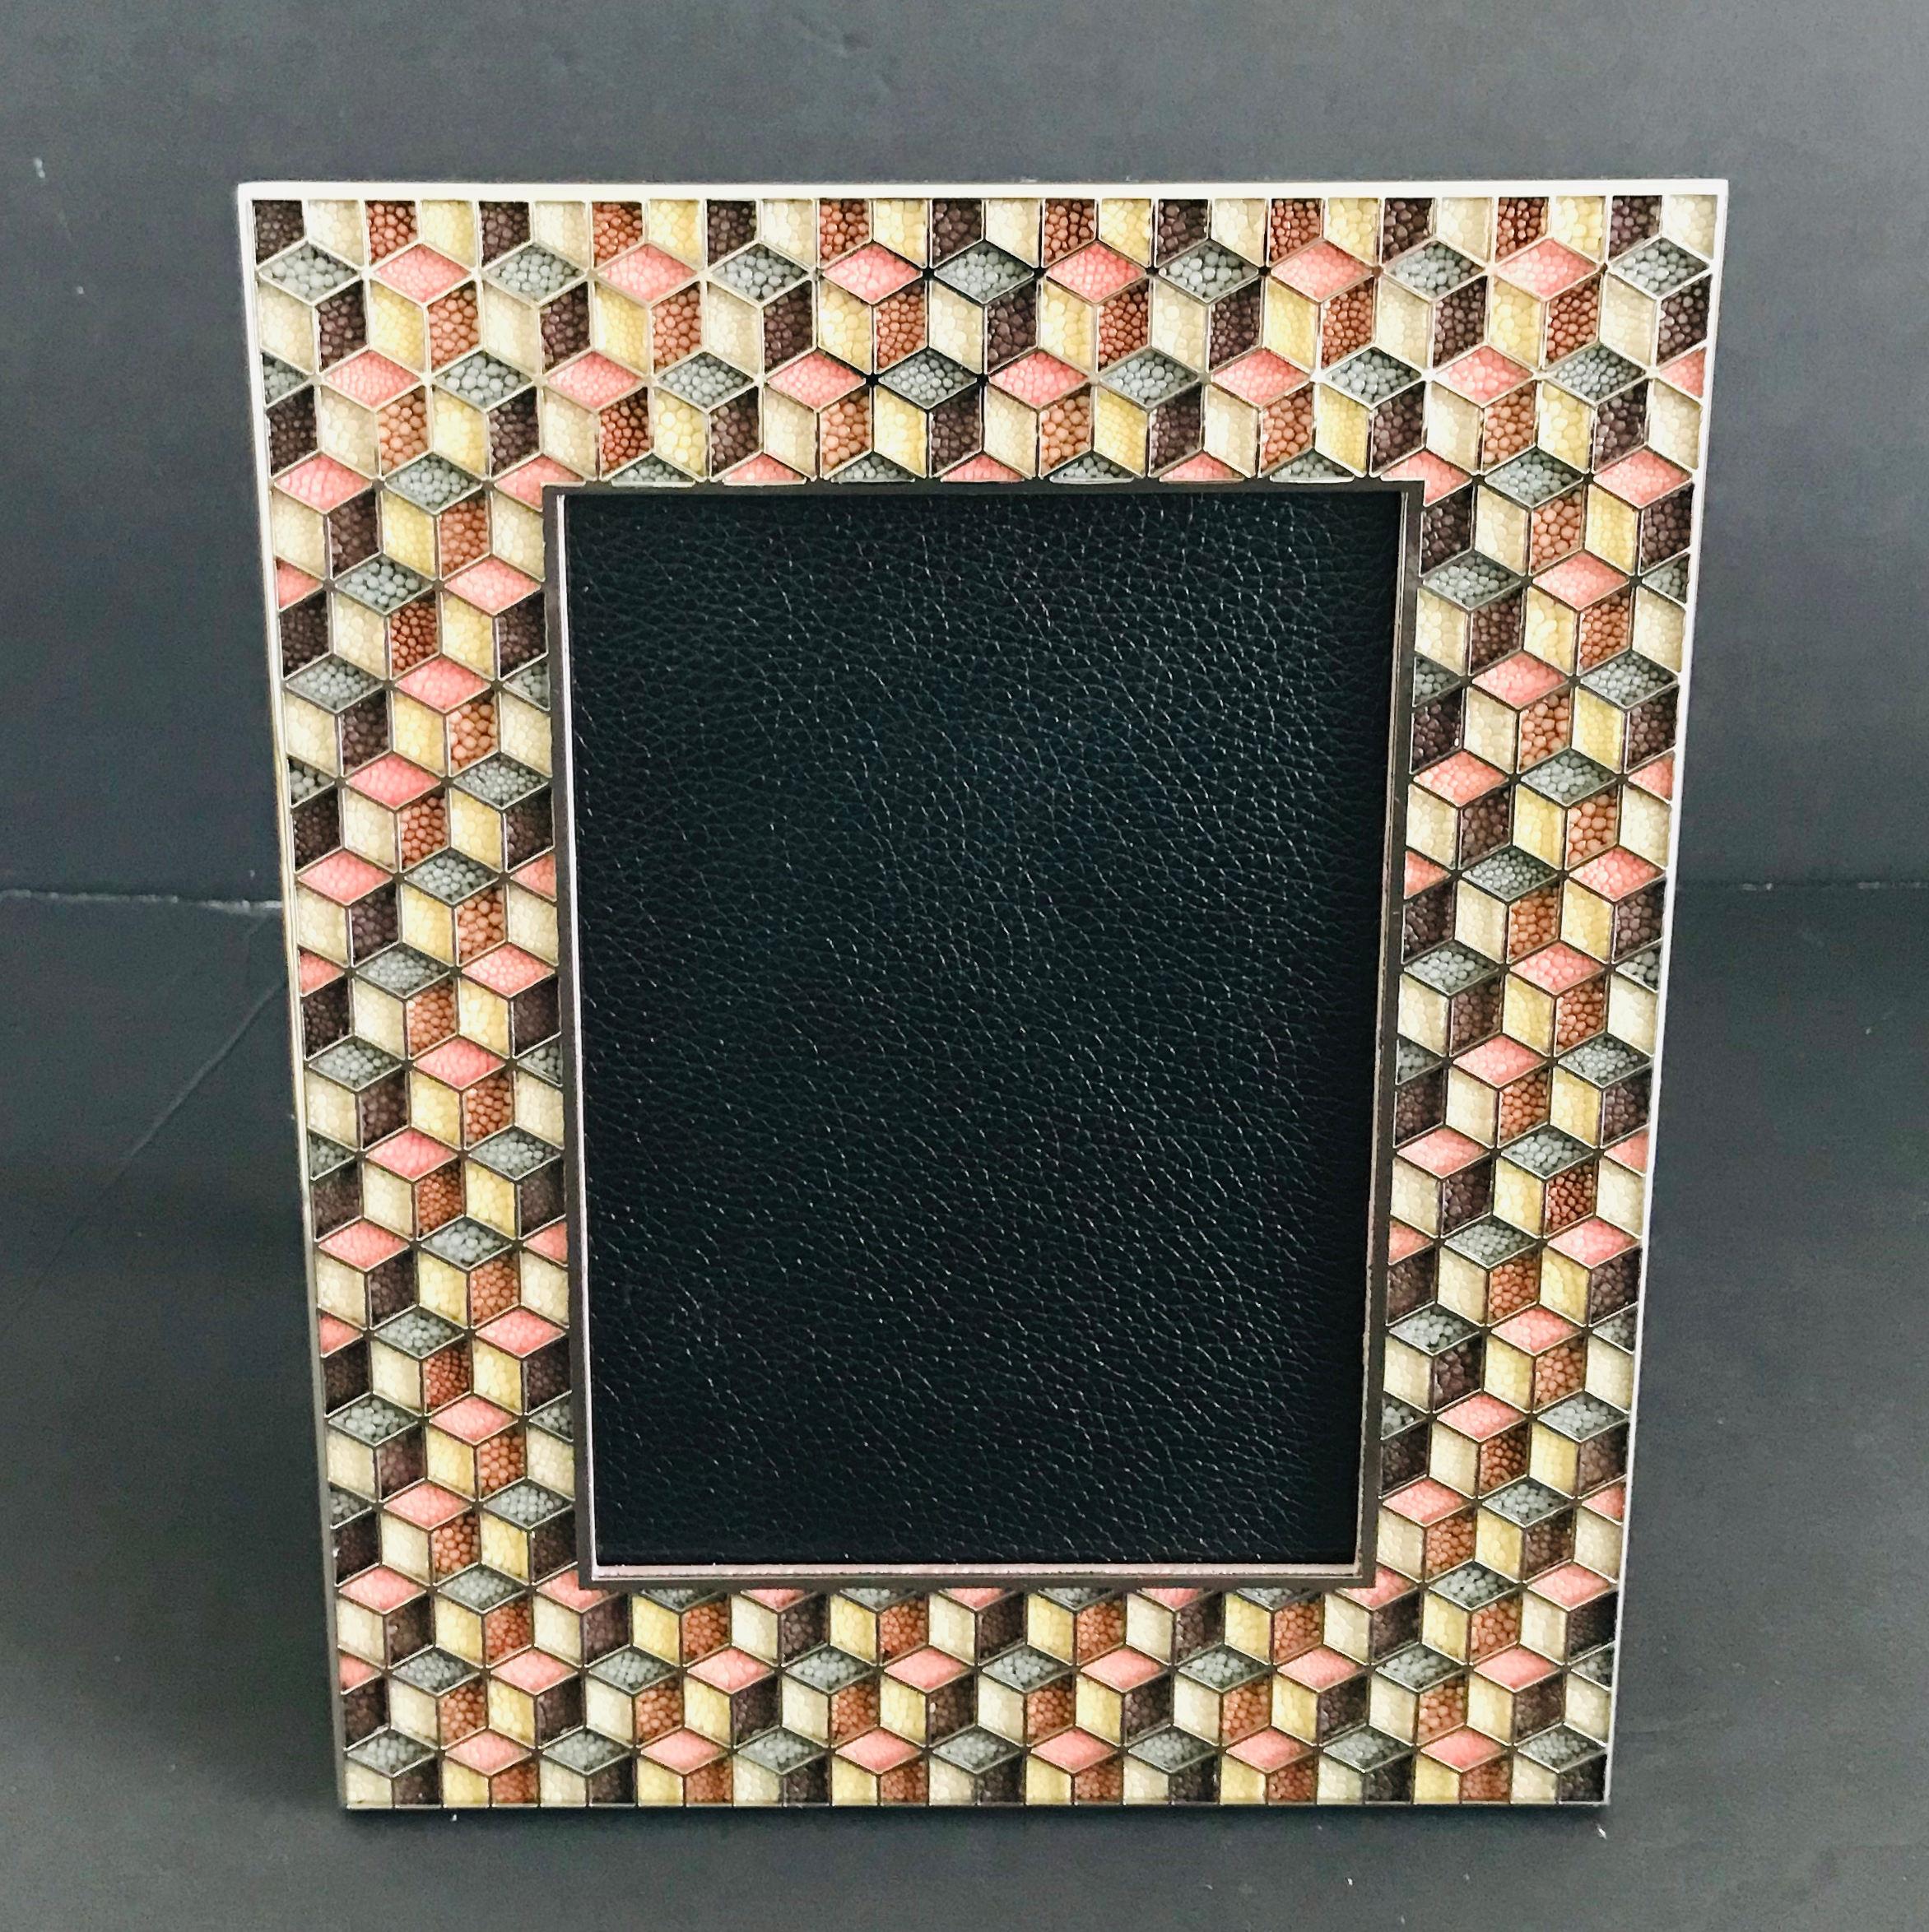 Multi-color shagreen leather and nickel-plated photo frame by Fabio Ltd
Height: 10.5 inches / Width: 8.5 inches / Depth: 1 inch
Photo size: 5 inches by 7 inches
LAST 1 in stock in Los Angeles
Order Reference #: FABIOLTD PF27
This piece makes for